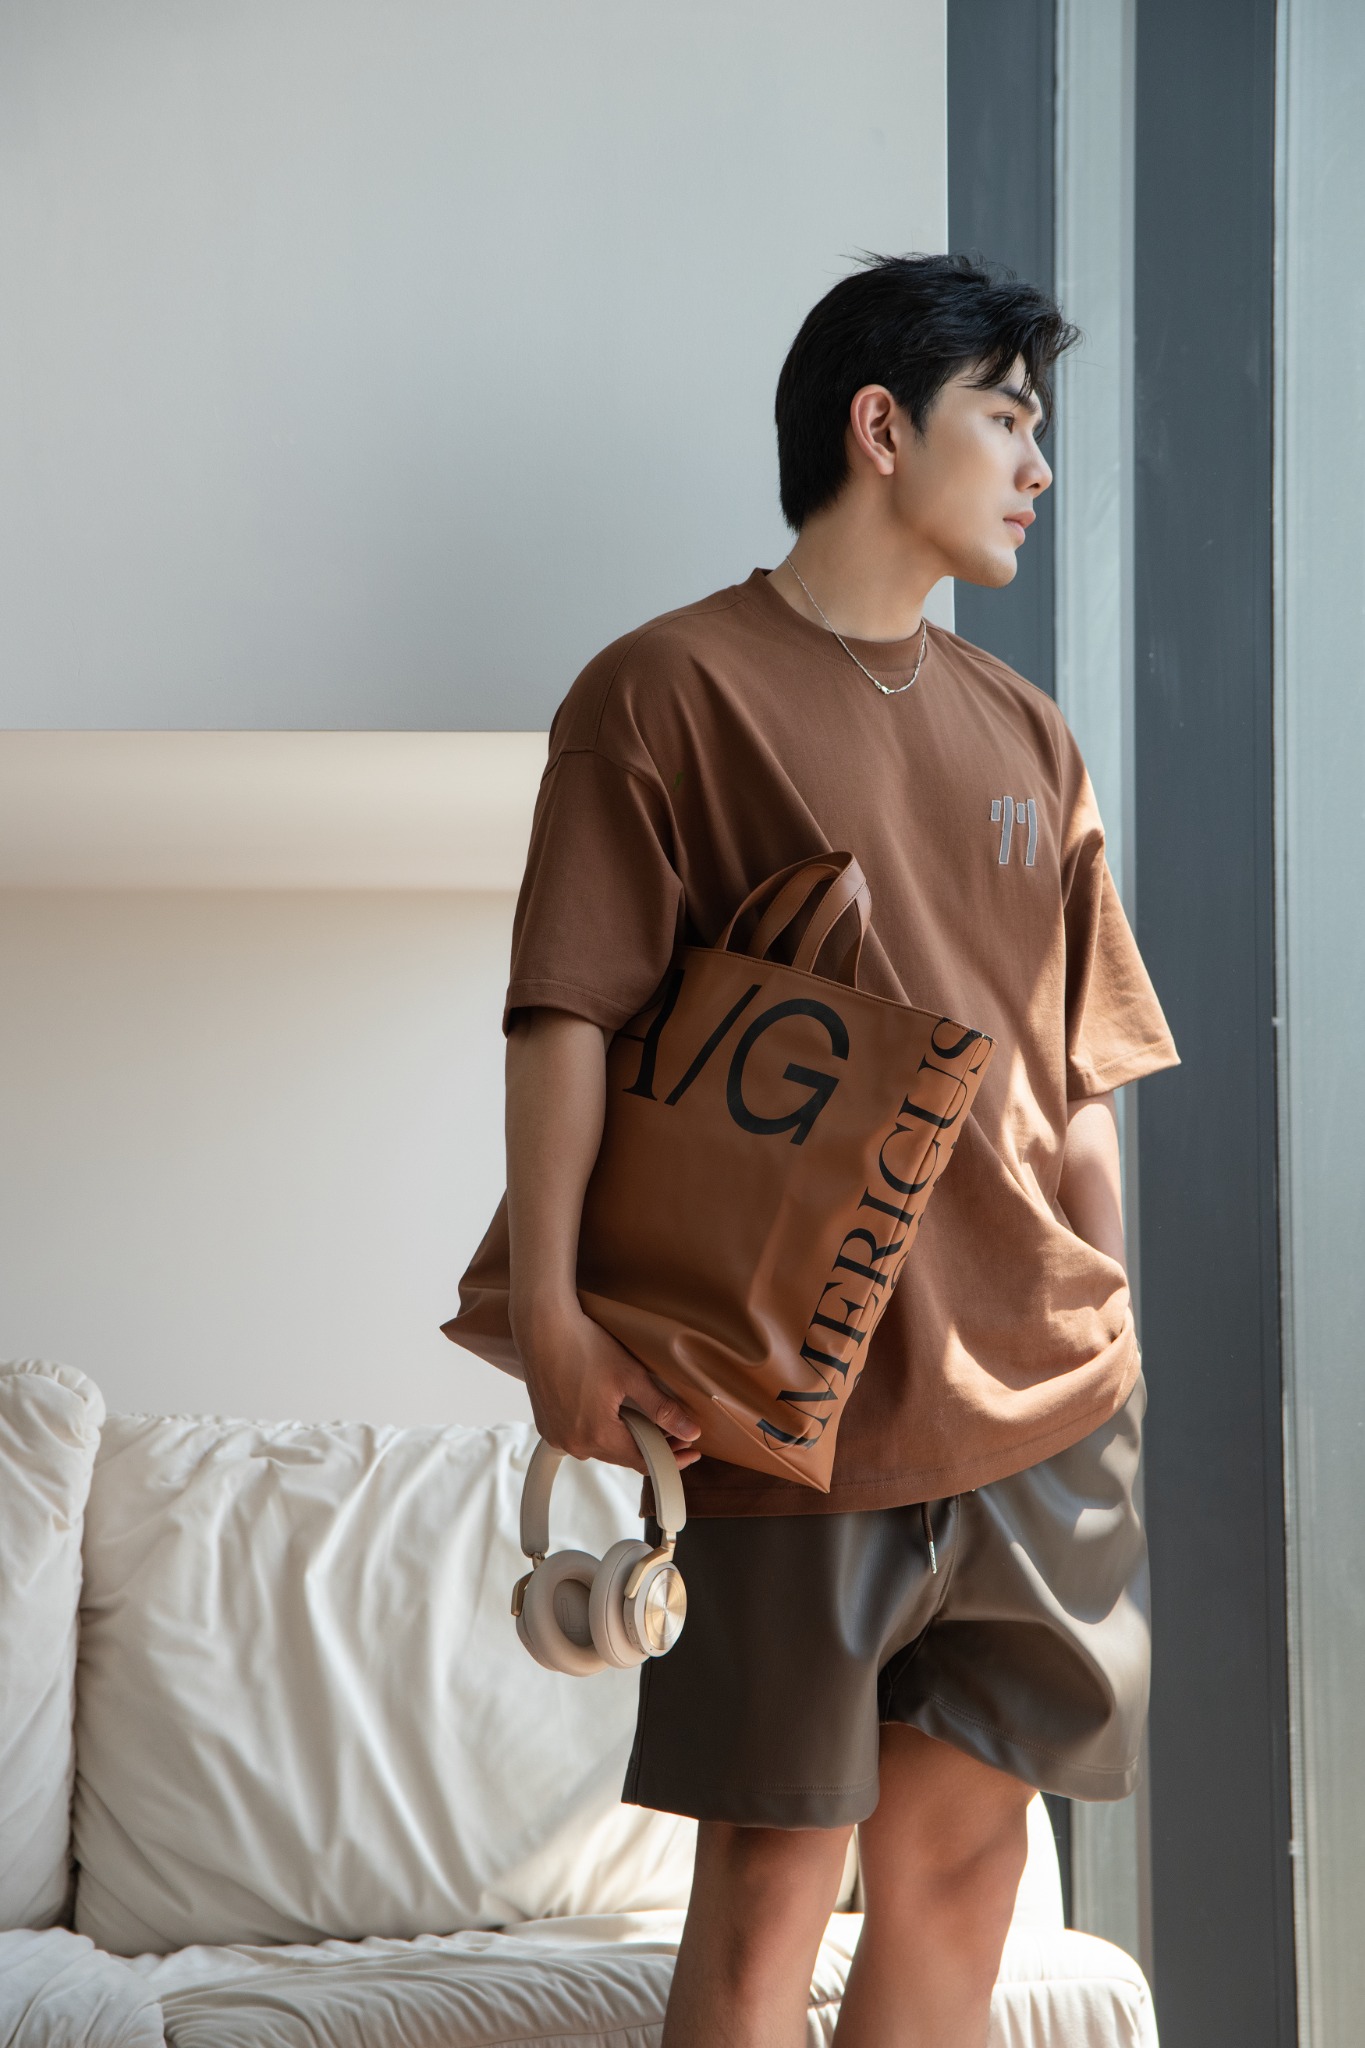 AG30 FACTORY LOOSE FIT NEW LOGO T-SHIRT - BROWN